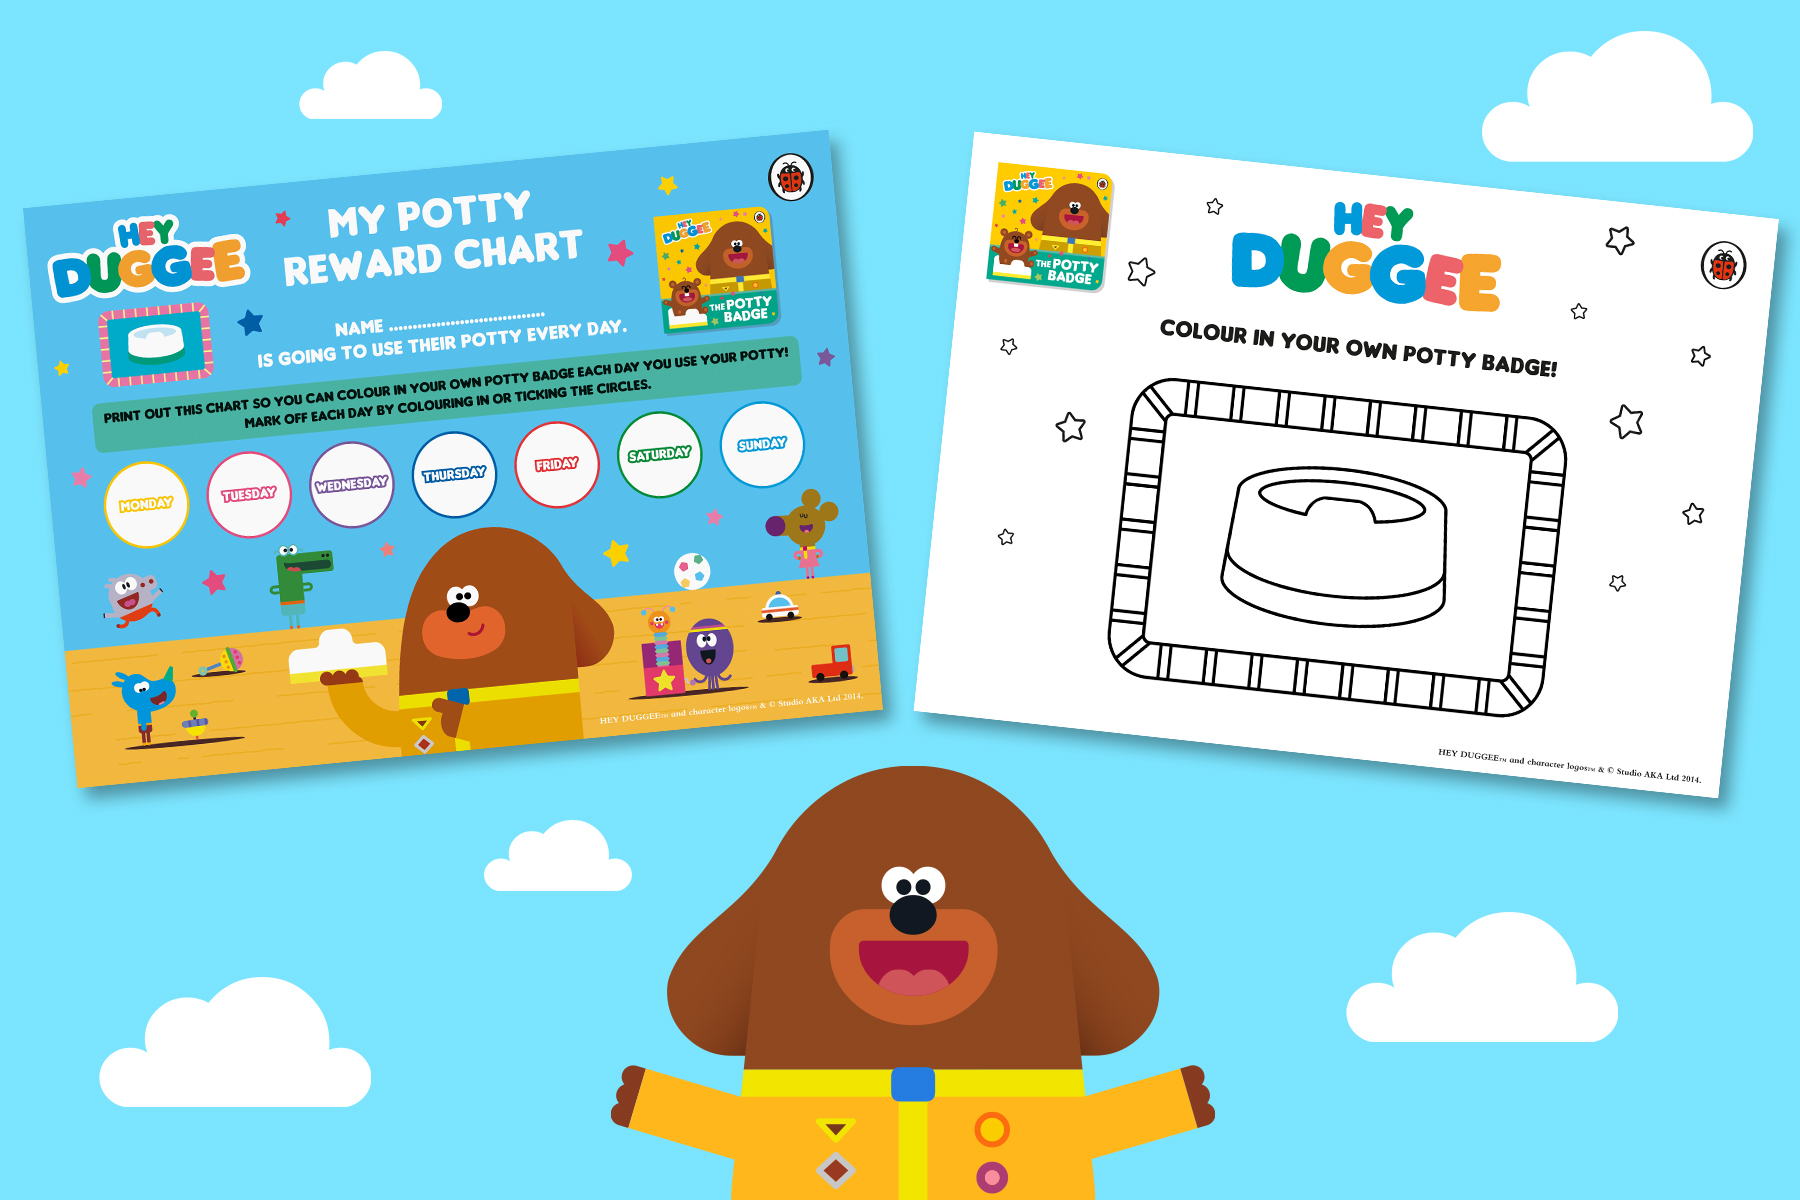 Image of Hey Duggee potty reward chart and badge to colour in on a blue cloud background